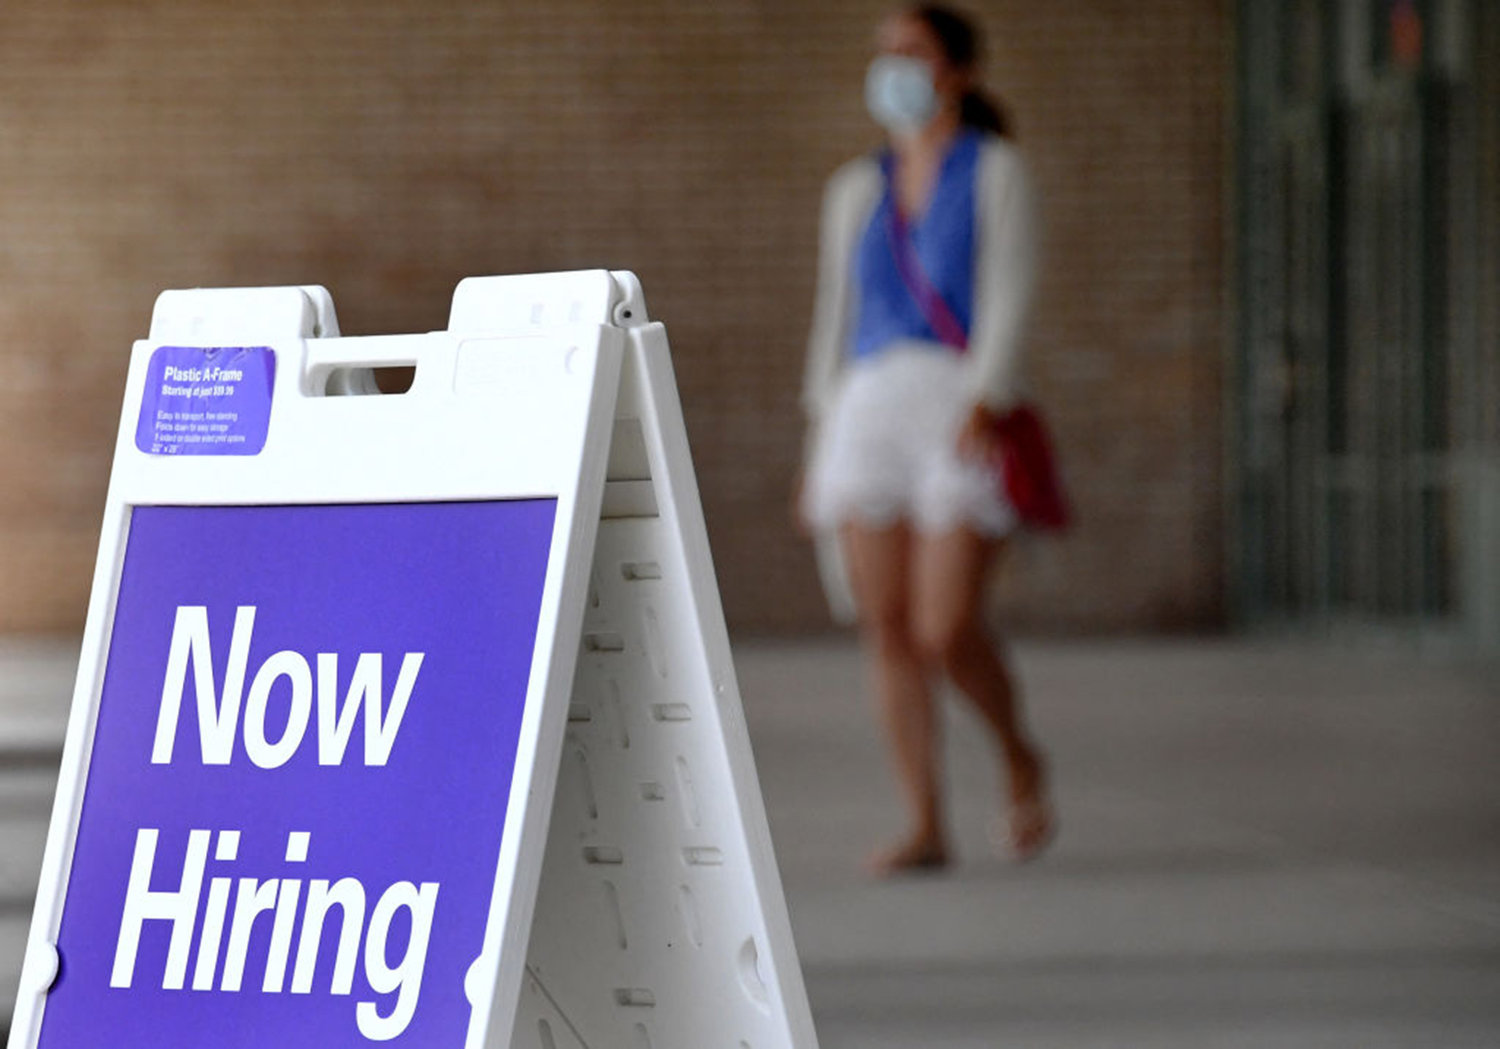 Pedestrians walk by a "Now Hiring" sign outside a store on August 16, 2021 in Arlington, Virginia. (Olivier Douliery/AFP via Getty Images/TNS)